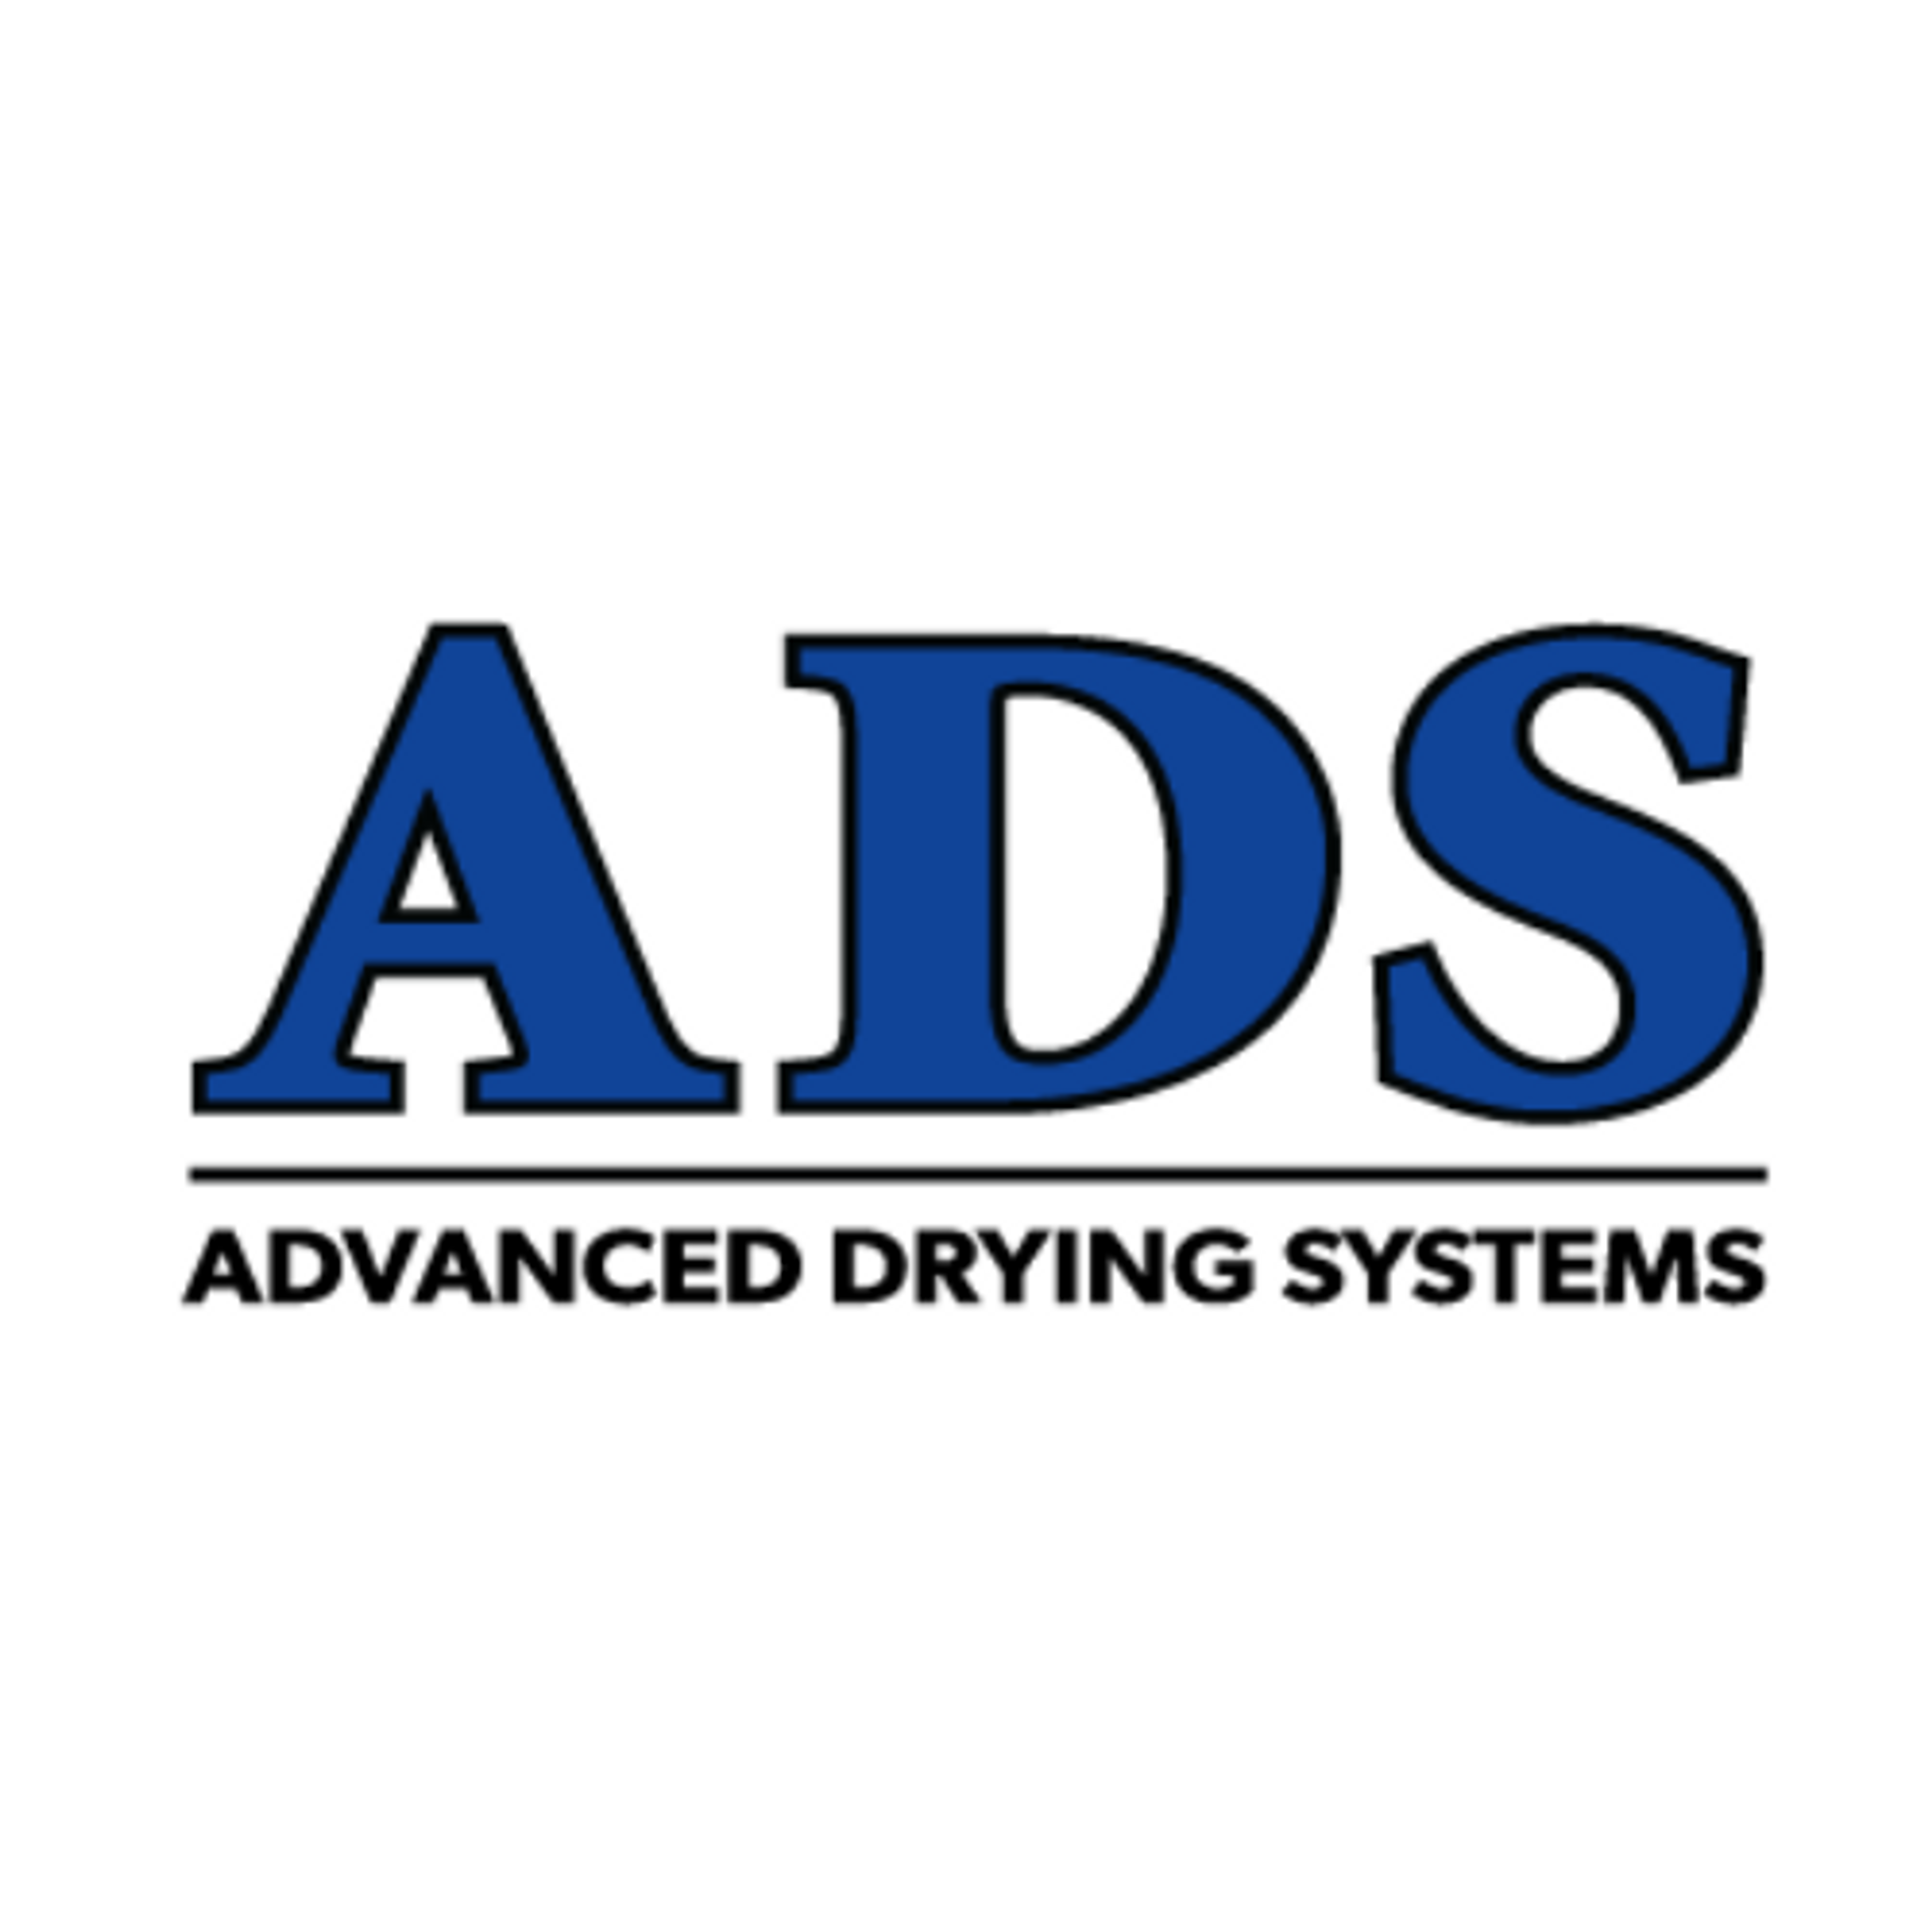 advanced drying systems